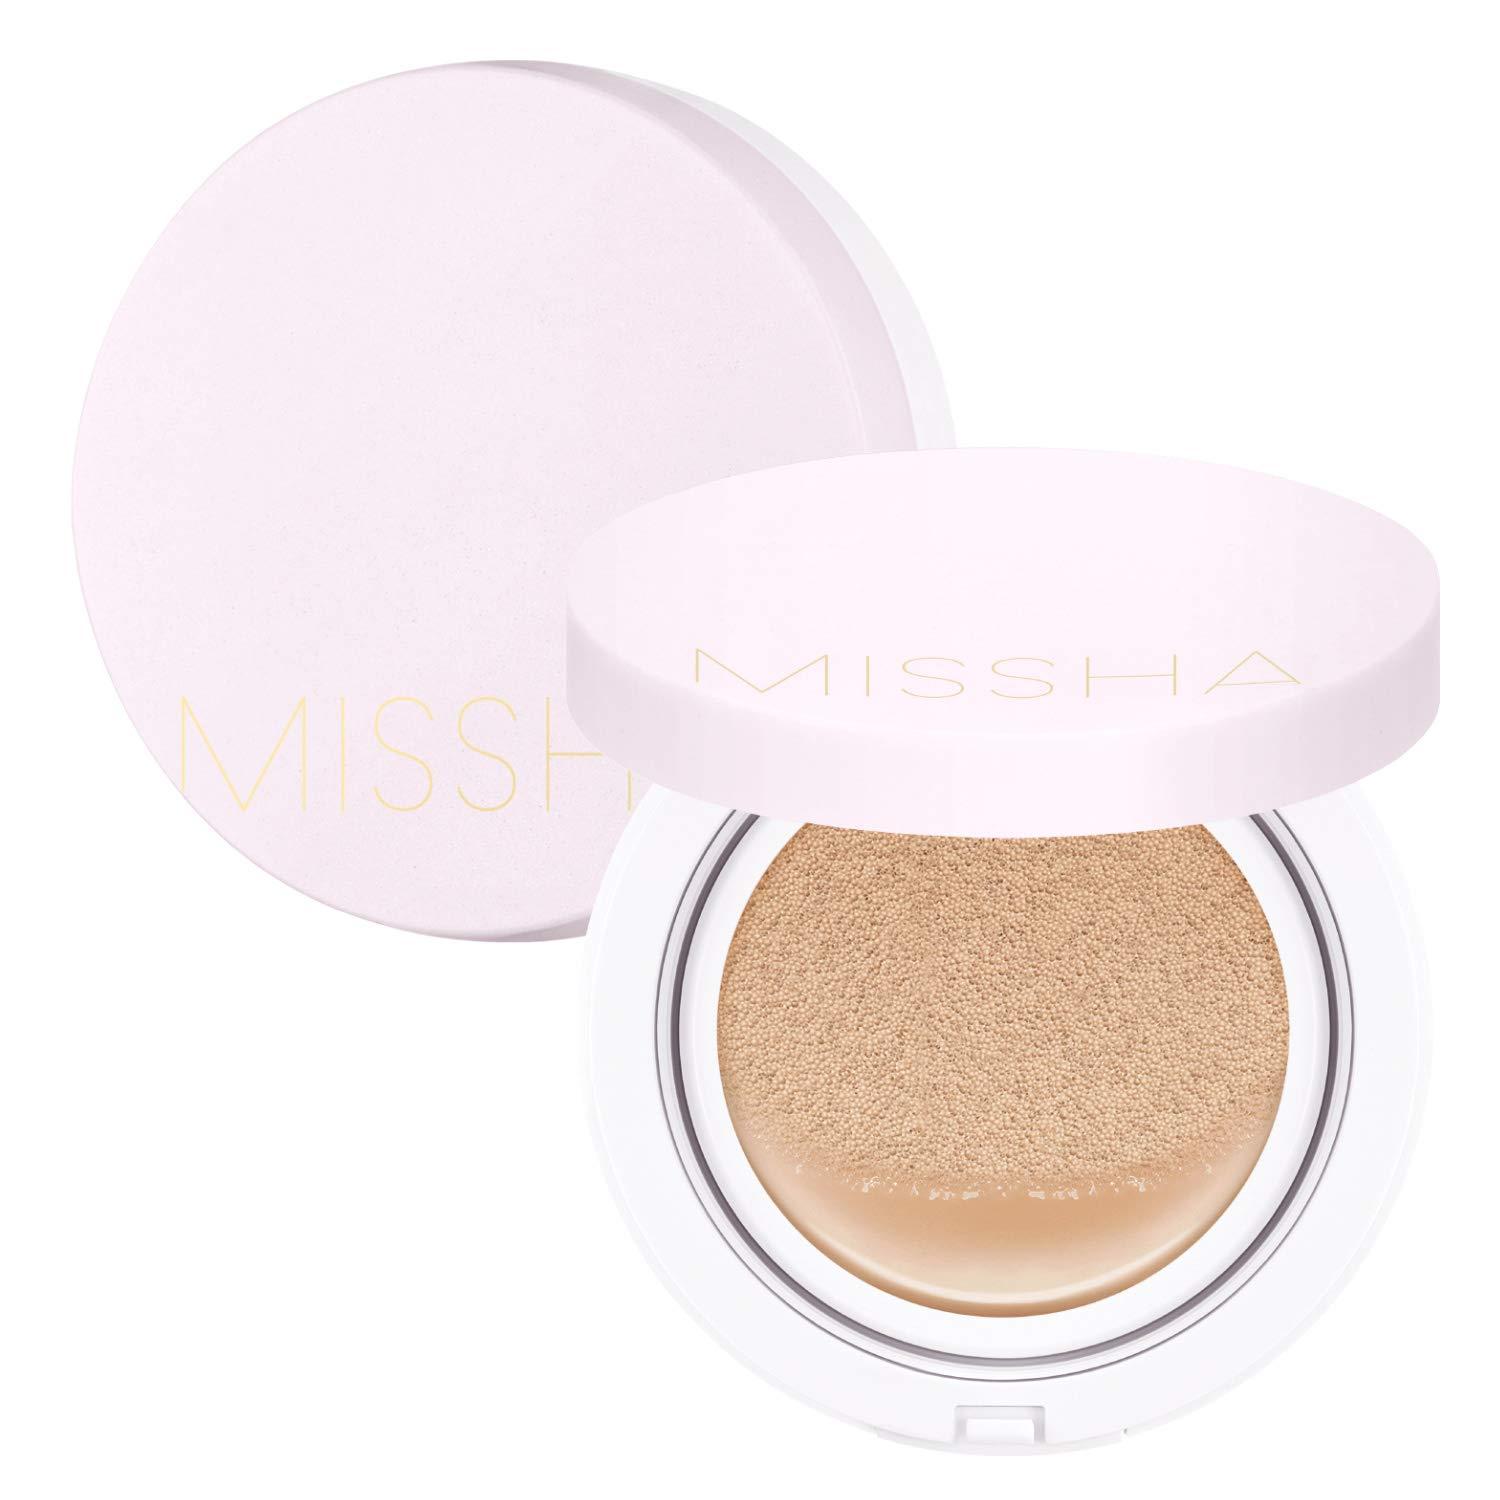 MISSHA Magic Cushion Foundation No.23 Natural Beige for Light with Neutral Skin Tone Flawless Coverage,Dewy Finish,Easy Application for All Skin Types